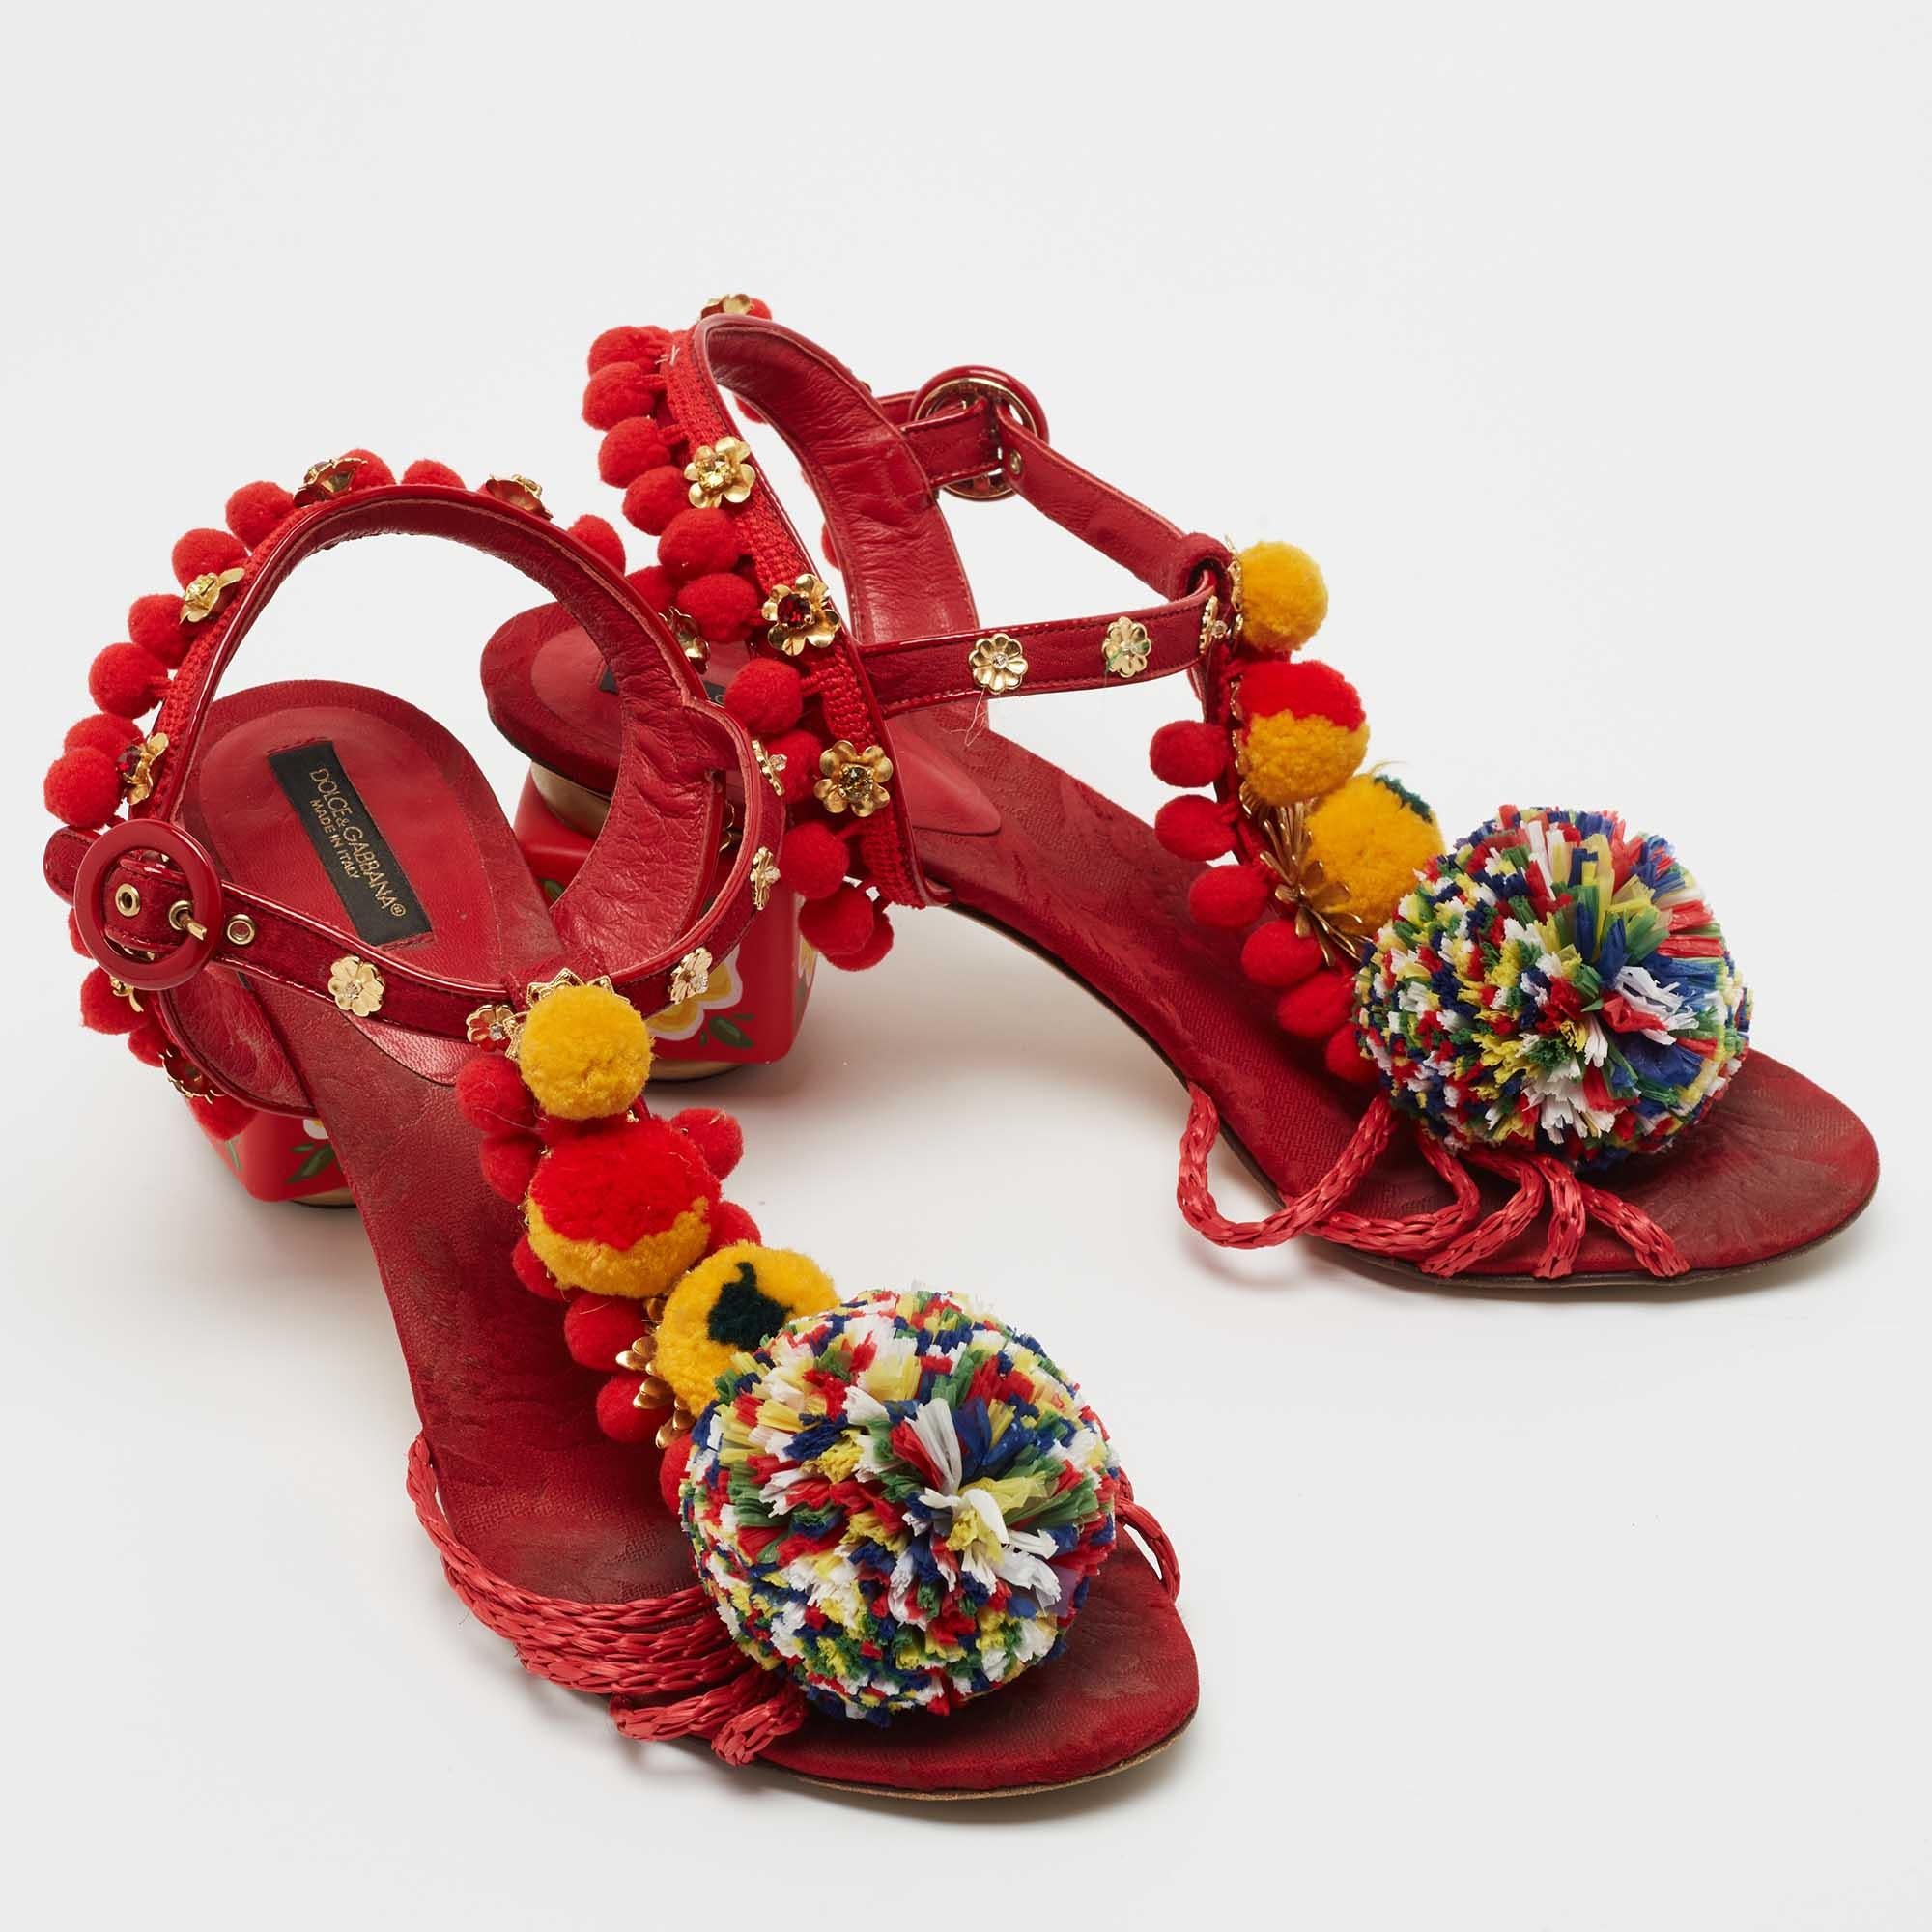 Dolce & Gabbana Multicolor Leather and Fabric Pom Pom Sandals Size 39 For Sale 2